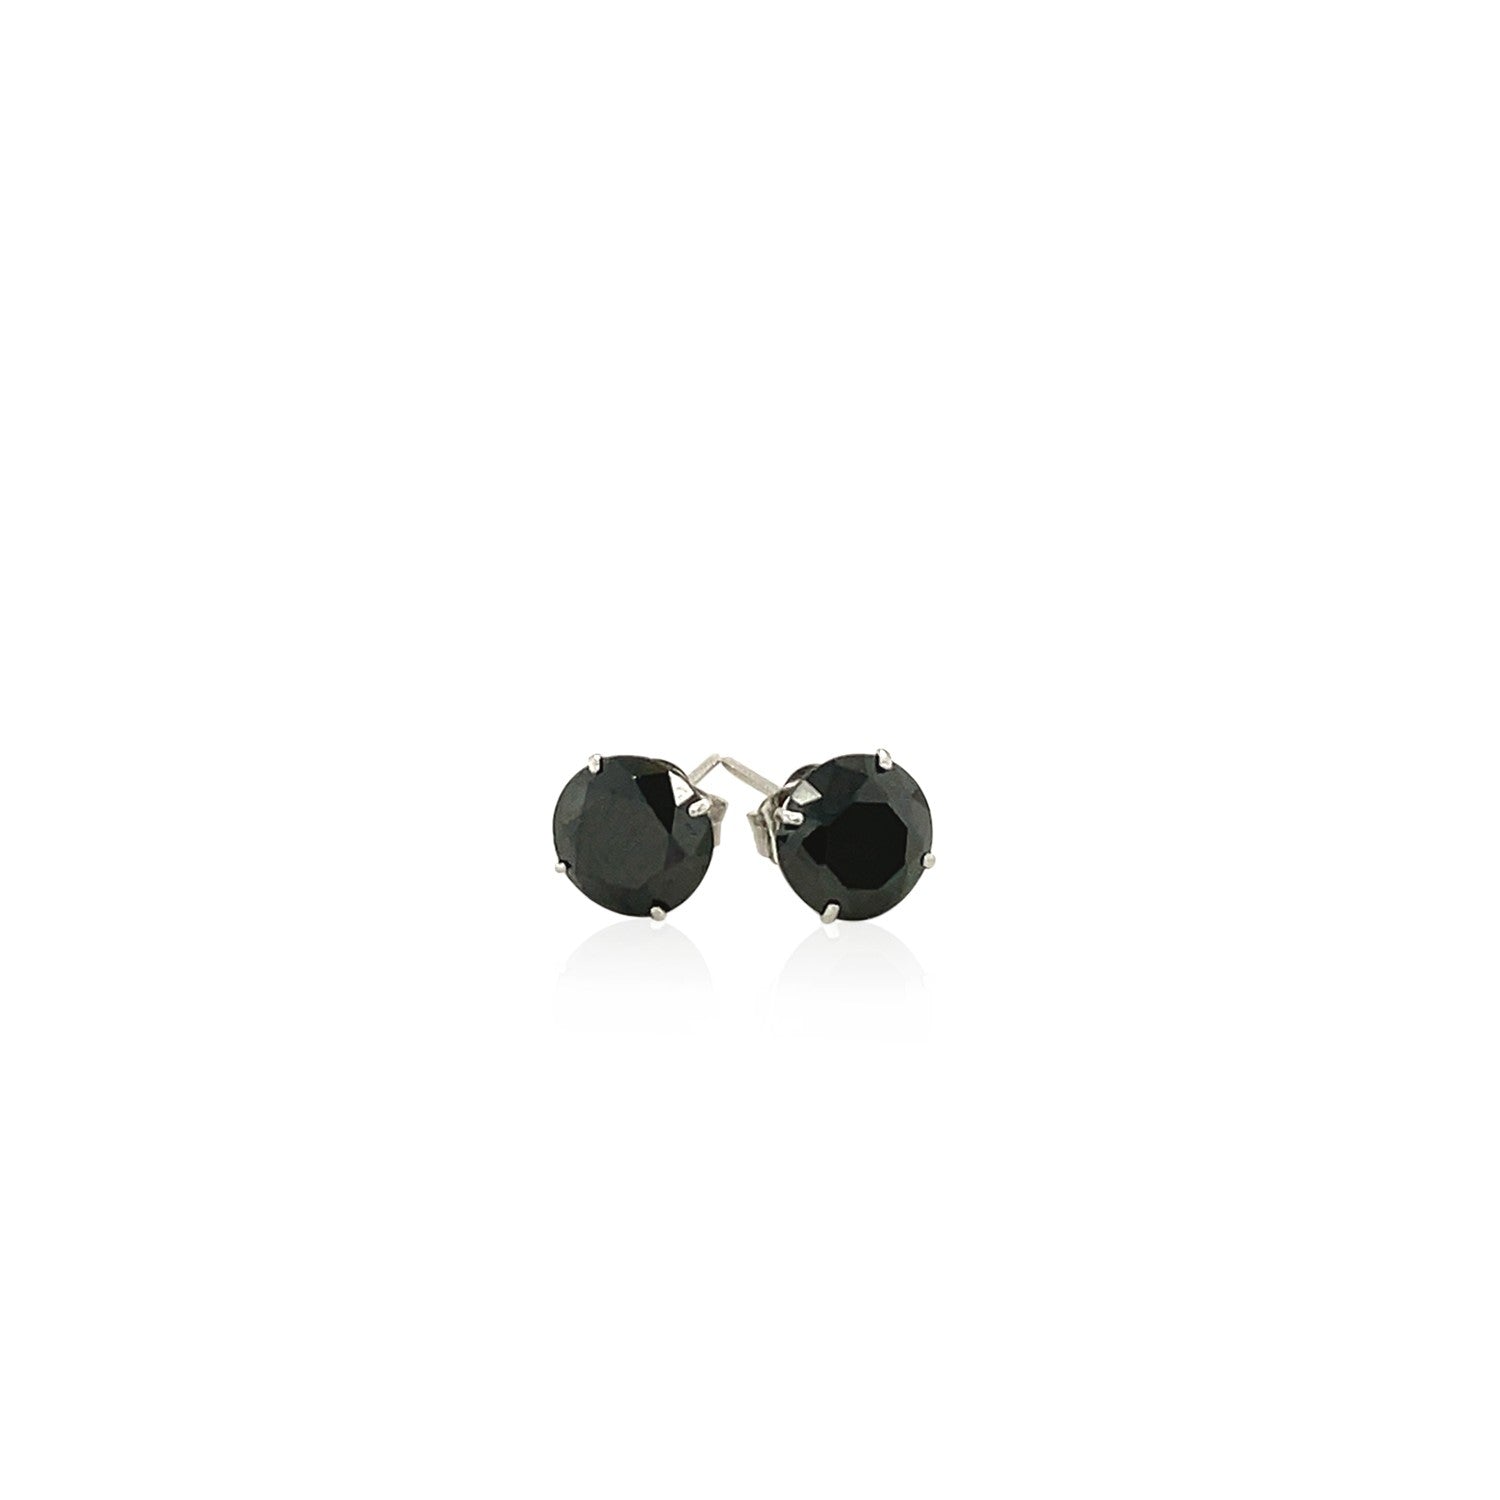 14k White Gold Stud Earrings with Black 6mm Faceted Cubic Zirconia-1